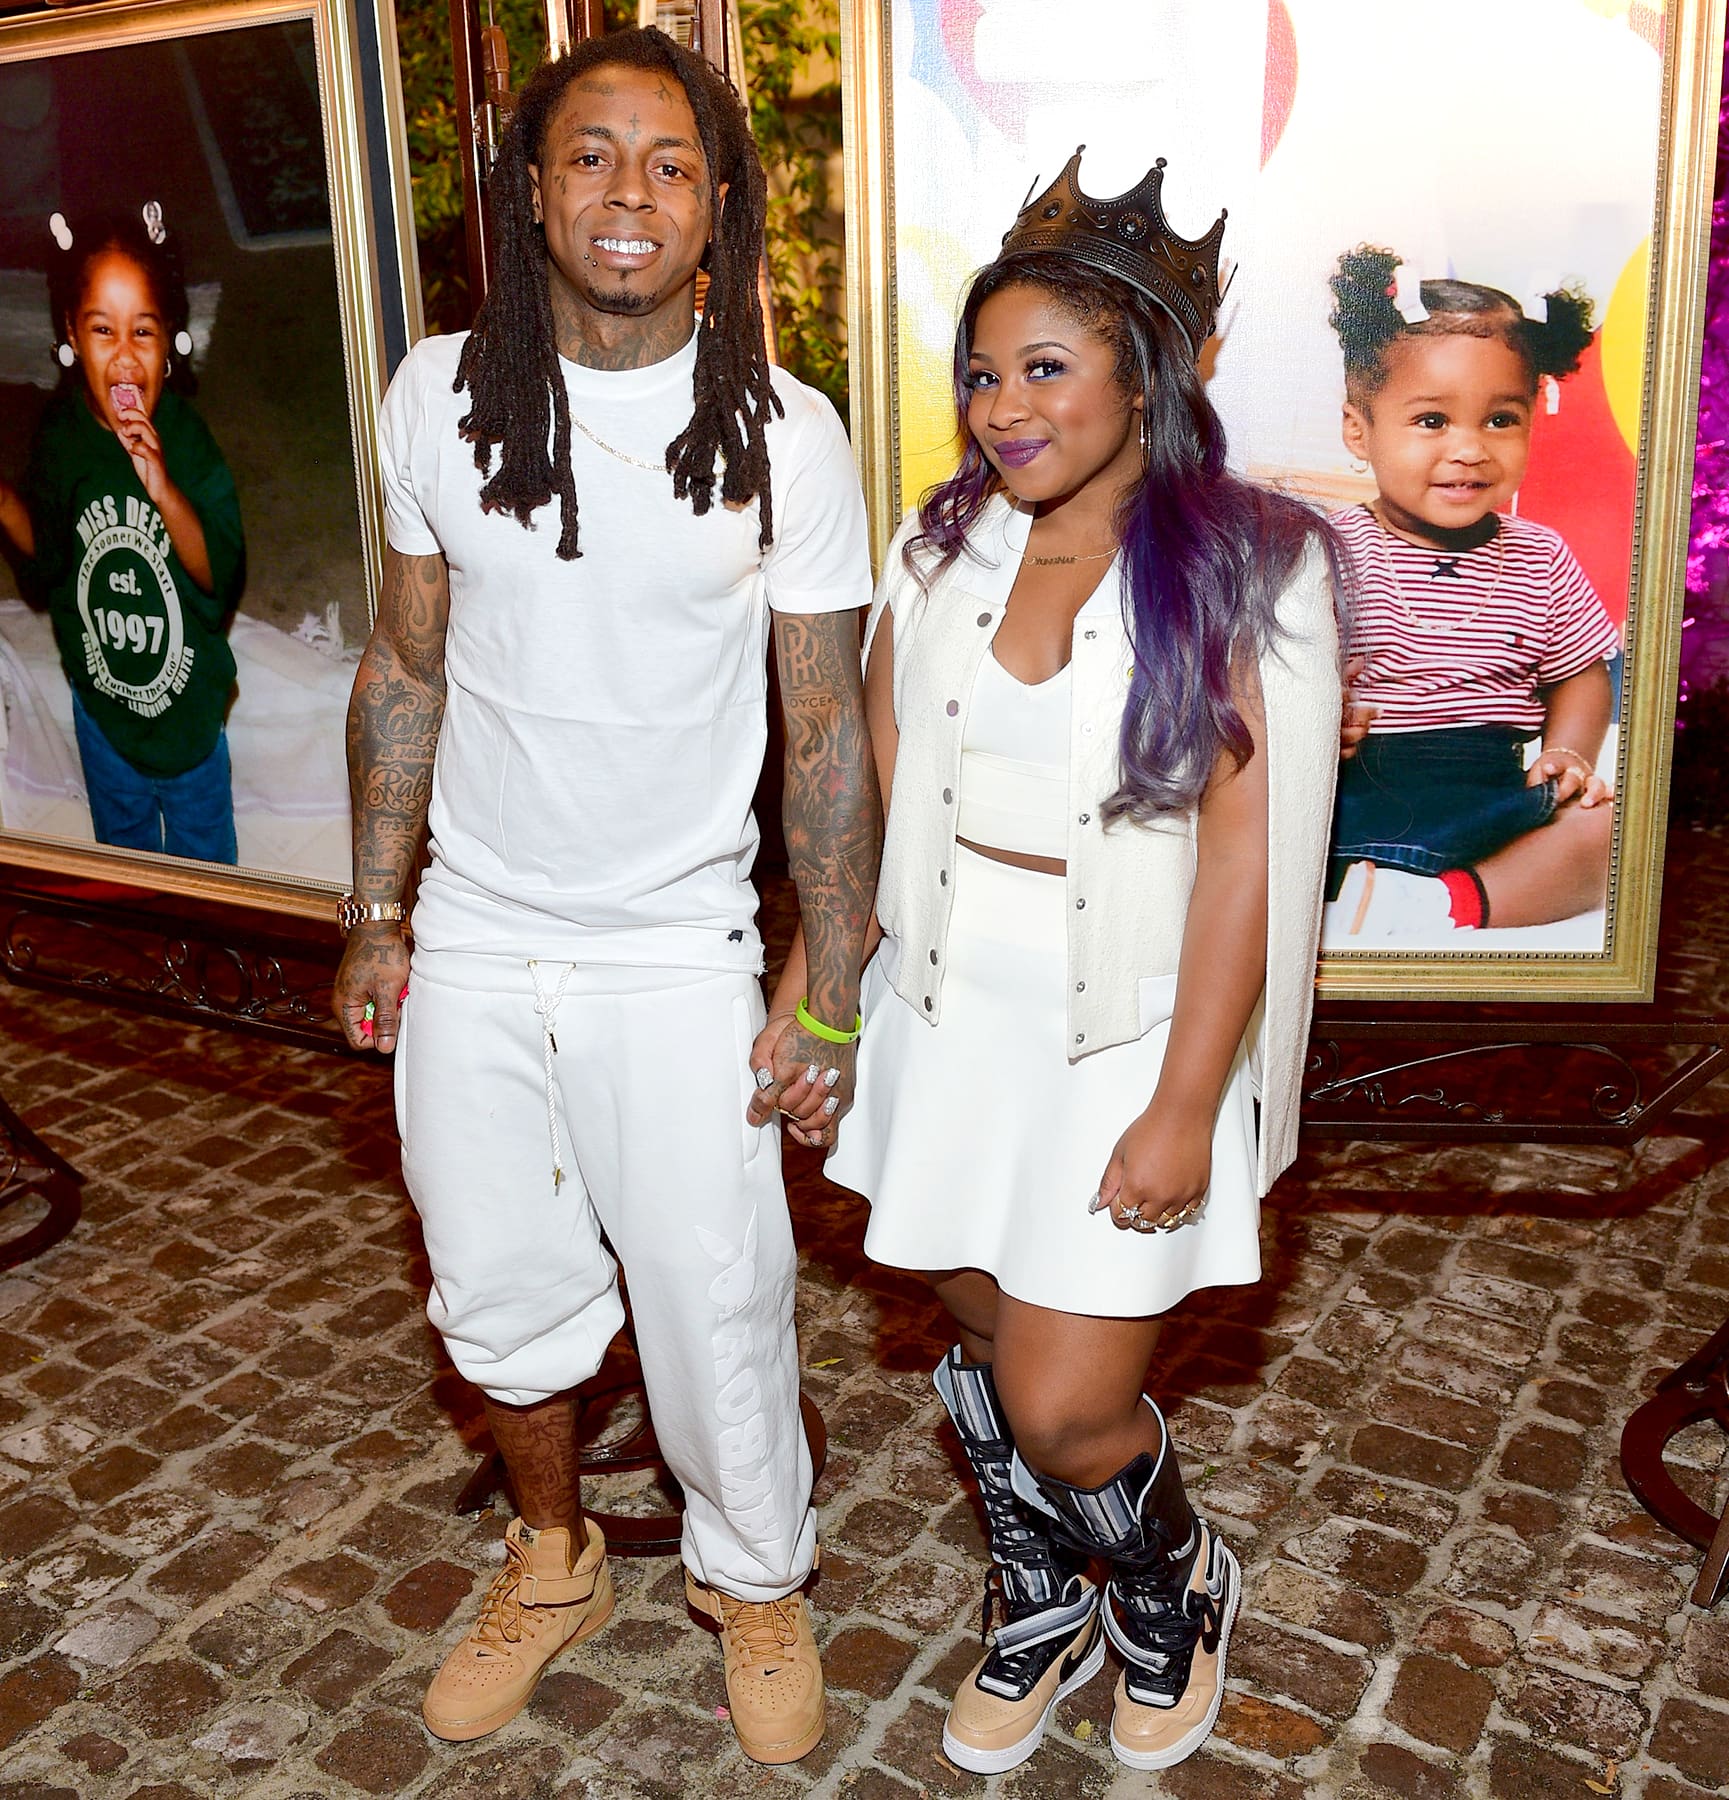 Reginae Carter Calls Her Dad, Lil Wayne Her Twin - See The Photo She Shared